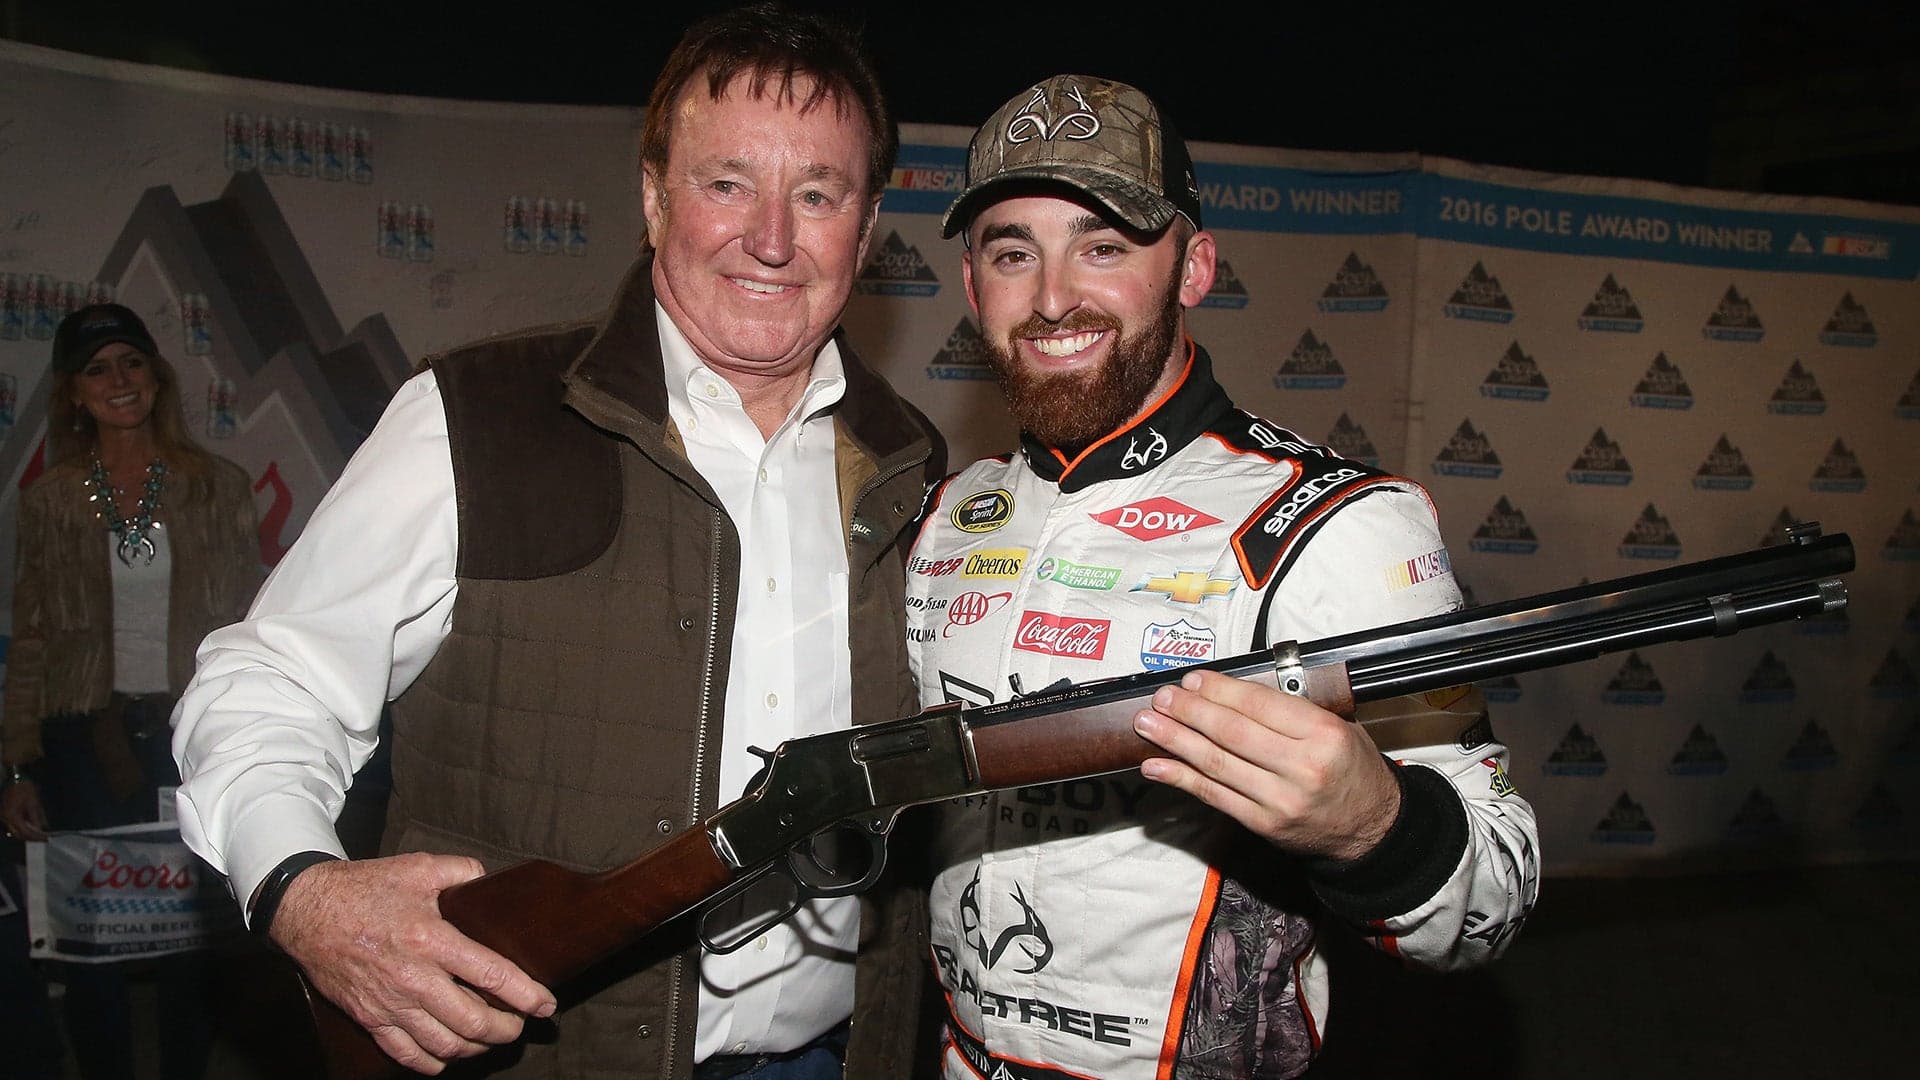 NASCAR Team Owner Richard Childress Shoots At Home Invaders, Police Say